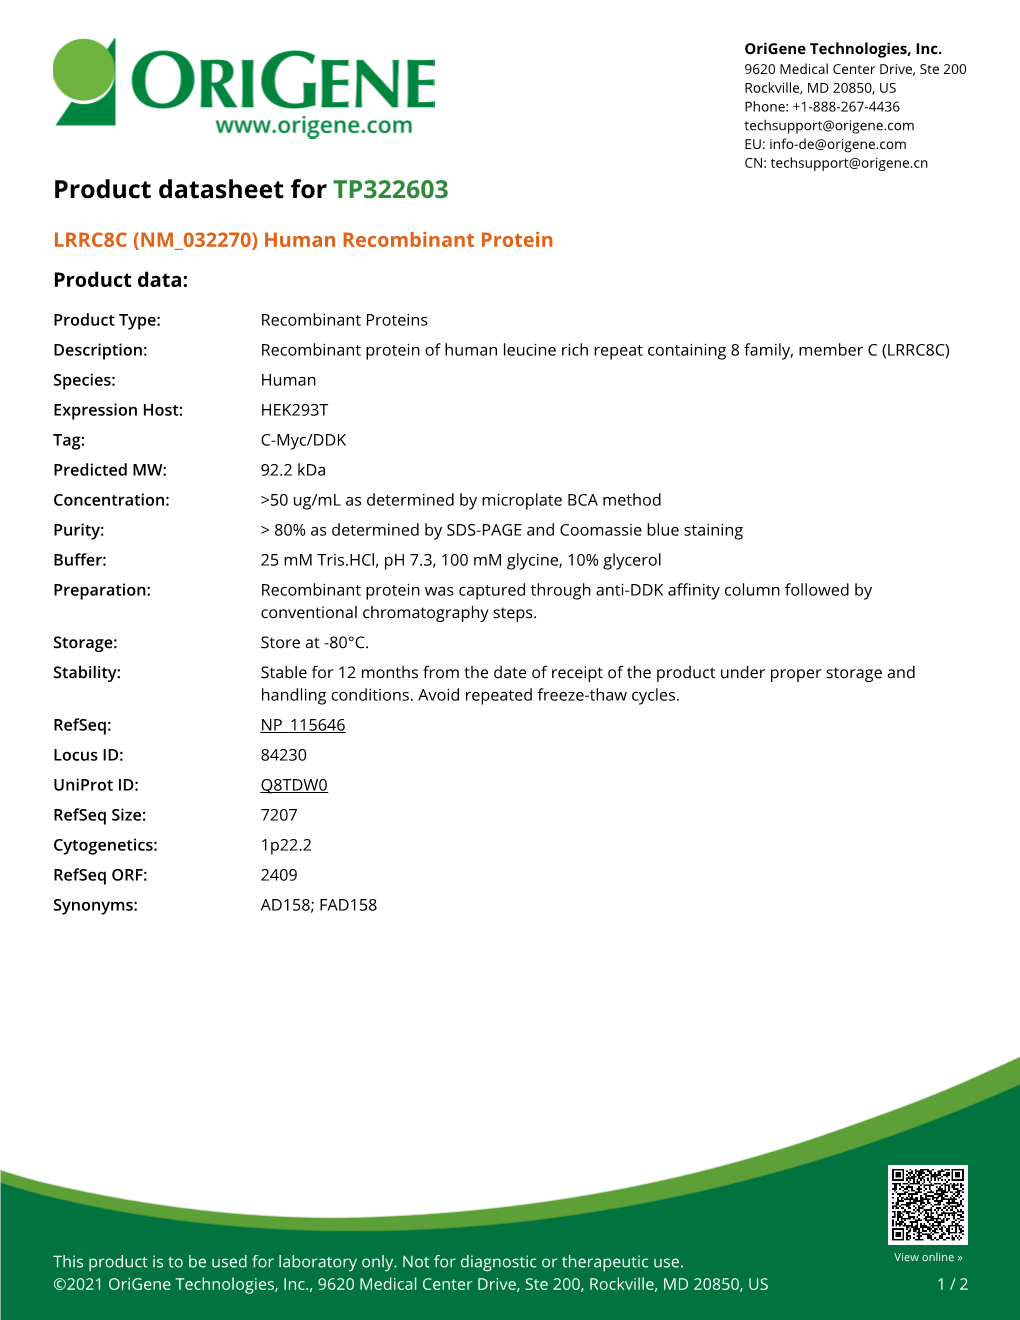 LRRC8C (NM 032270) Human Recombinant Protein – TP322603